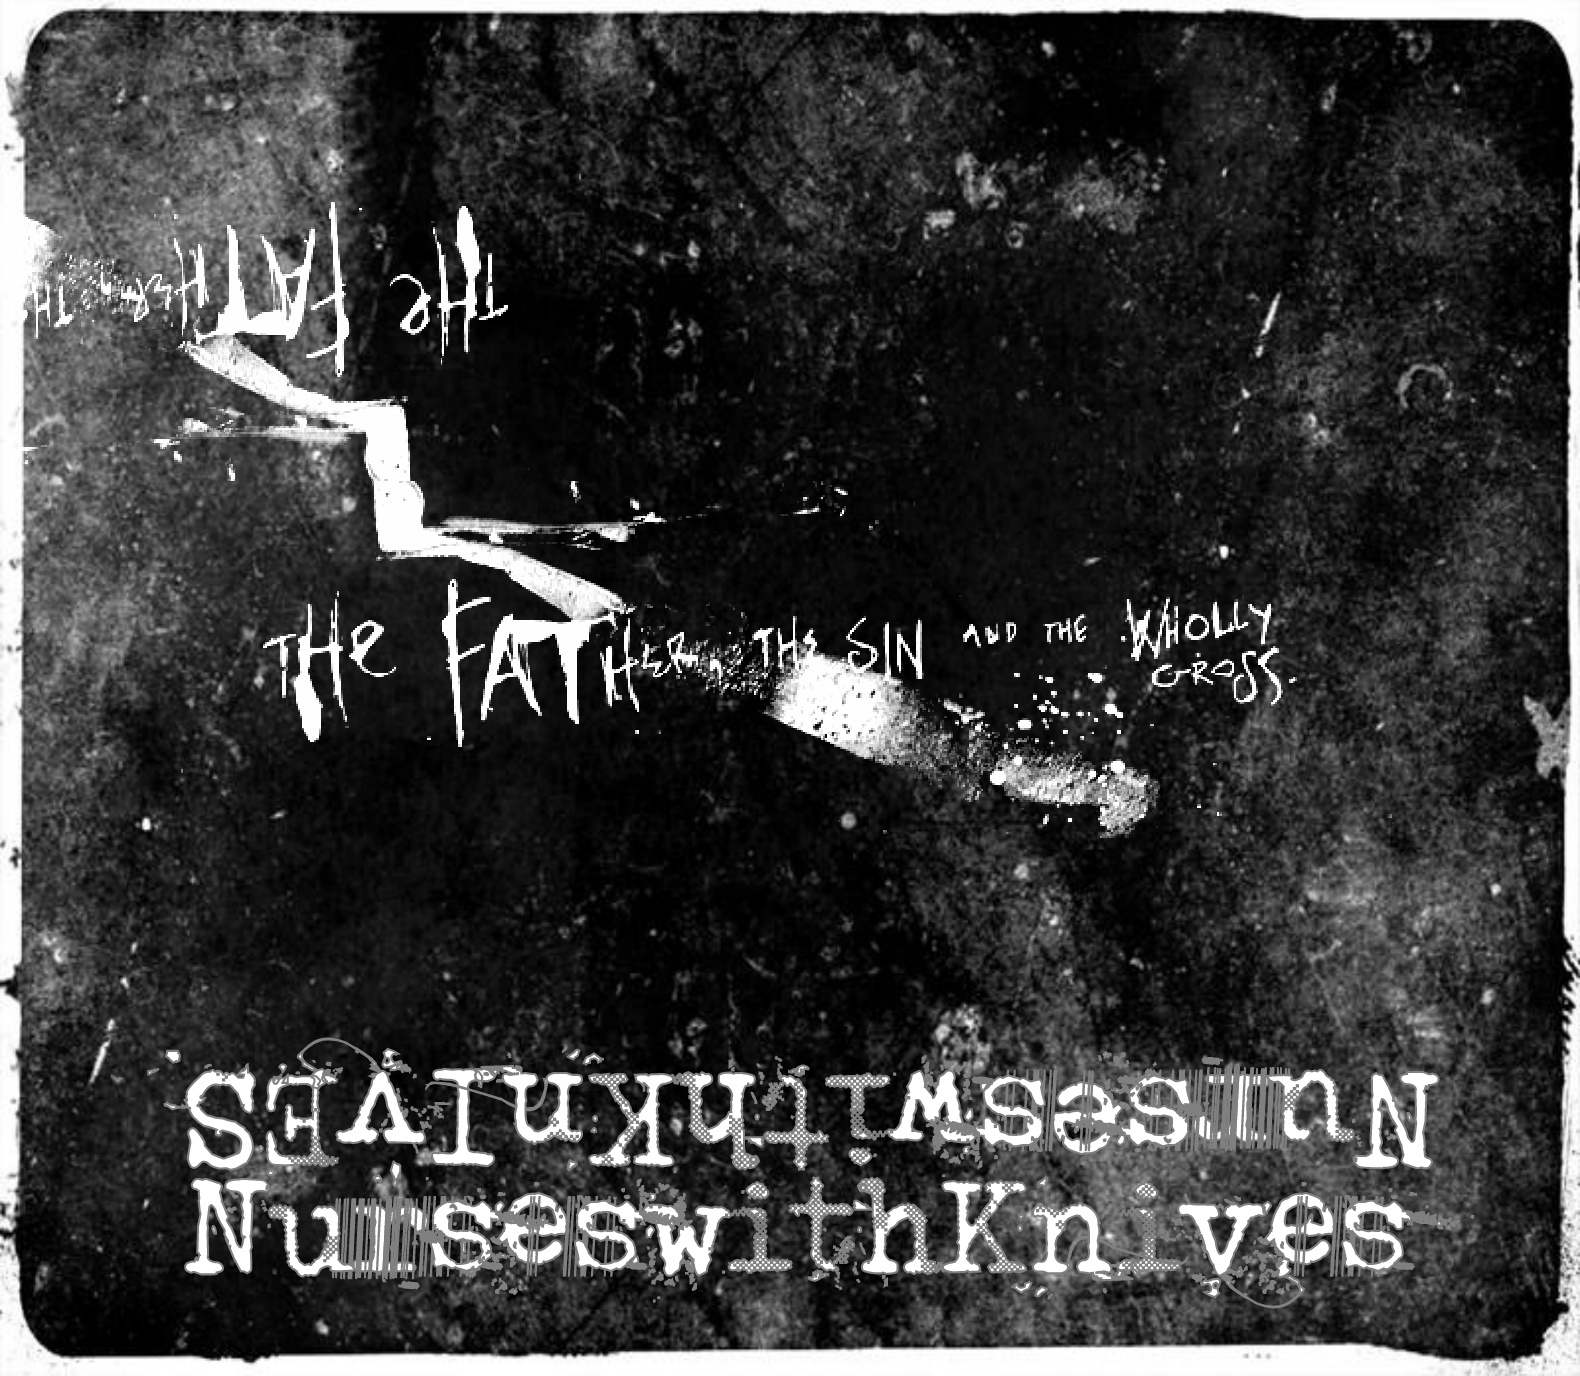 NURSES WITH KNIVES – The Father The Sin And The Wholy Gross